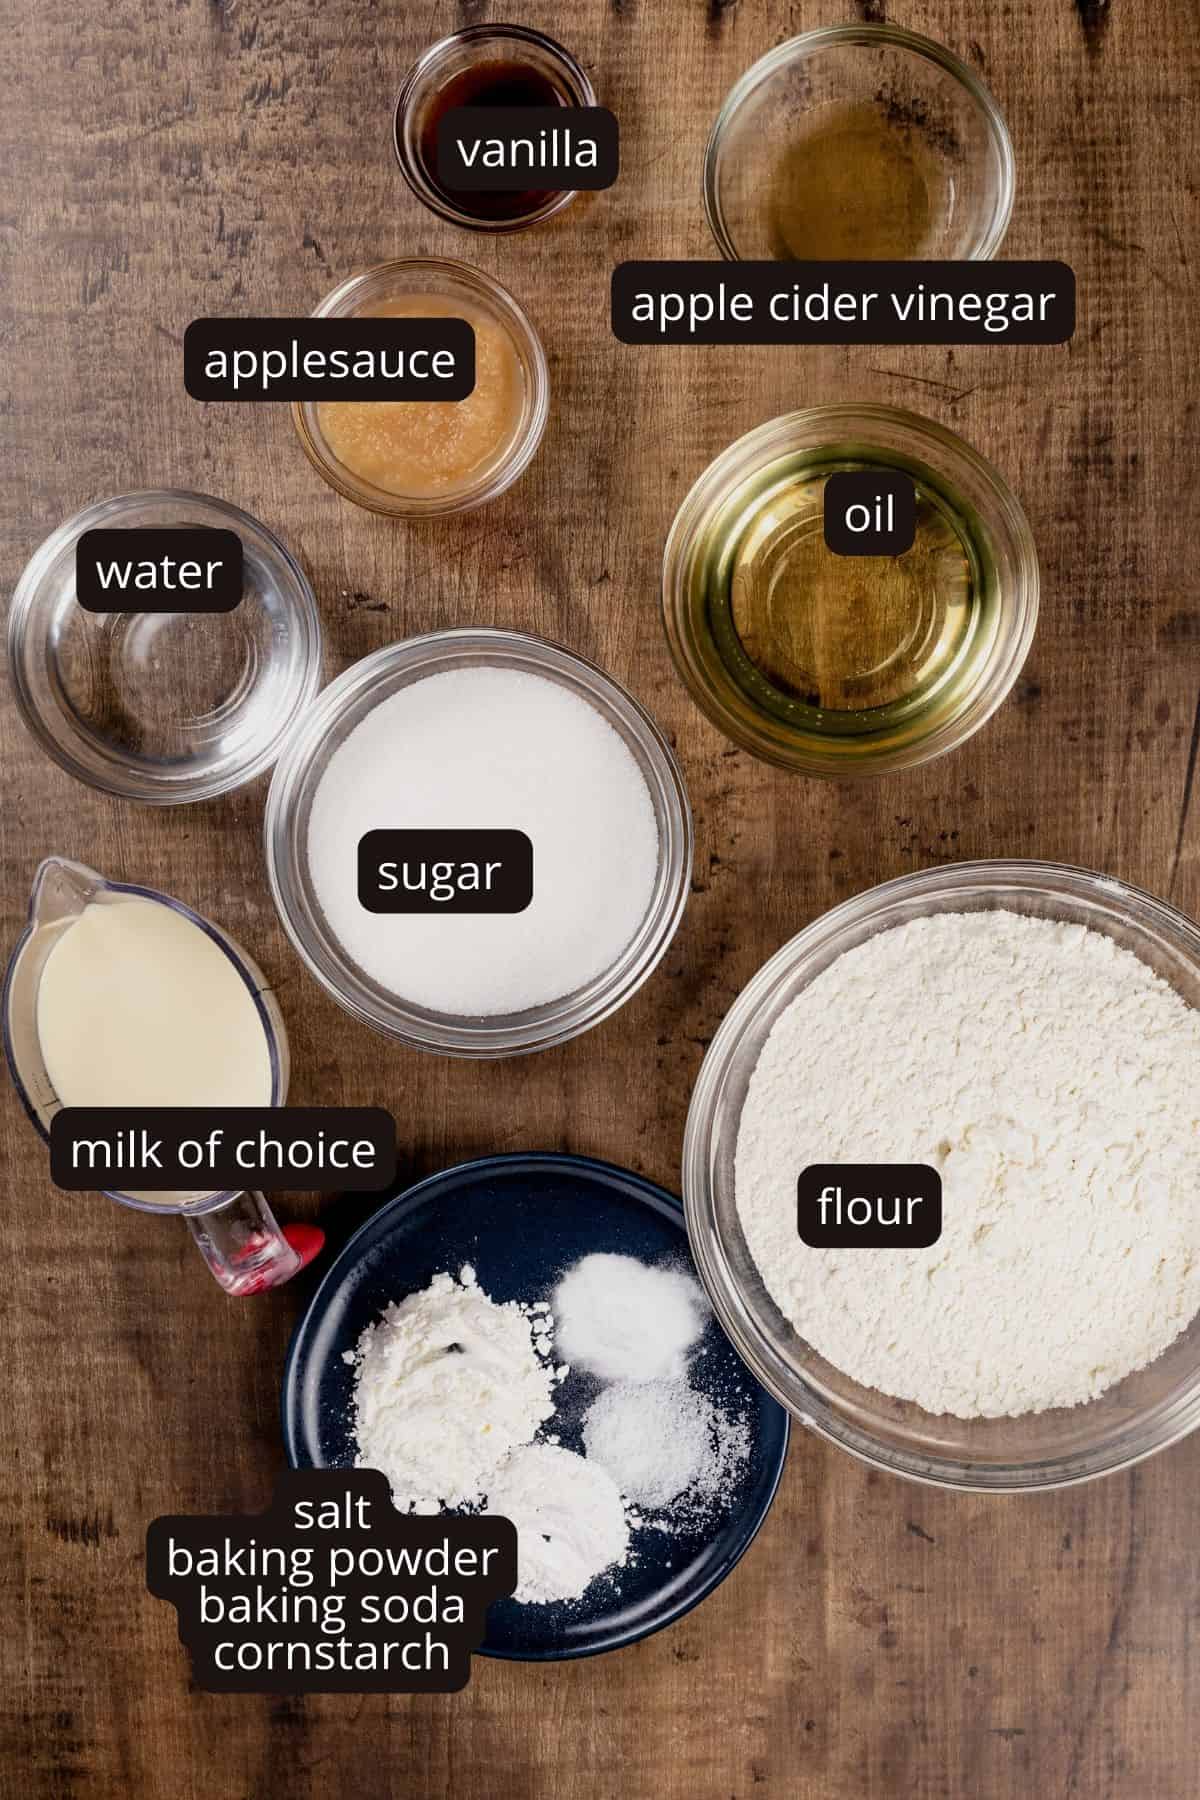 Ingredients for a vegan vanilla cake in various glass bowls are on a wood table top. Black and white labels have been added to name each ingredient.